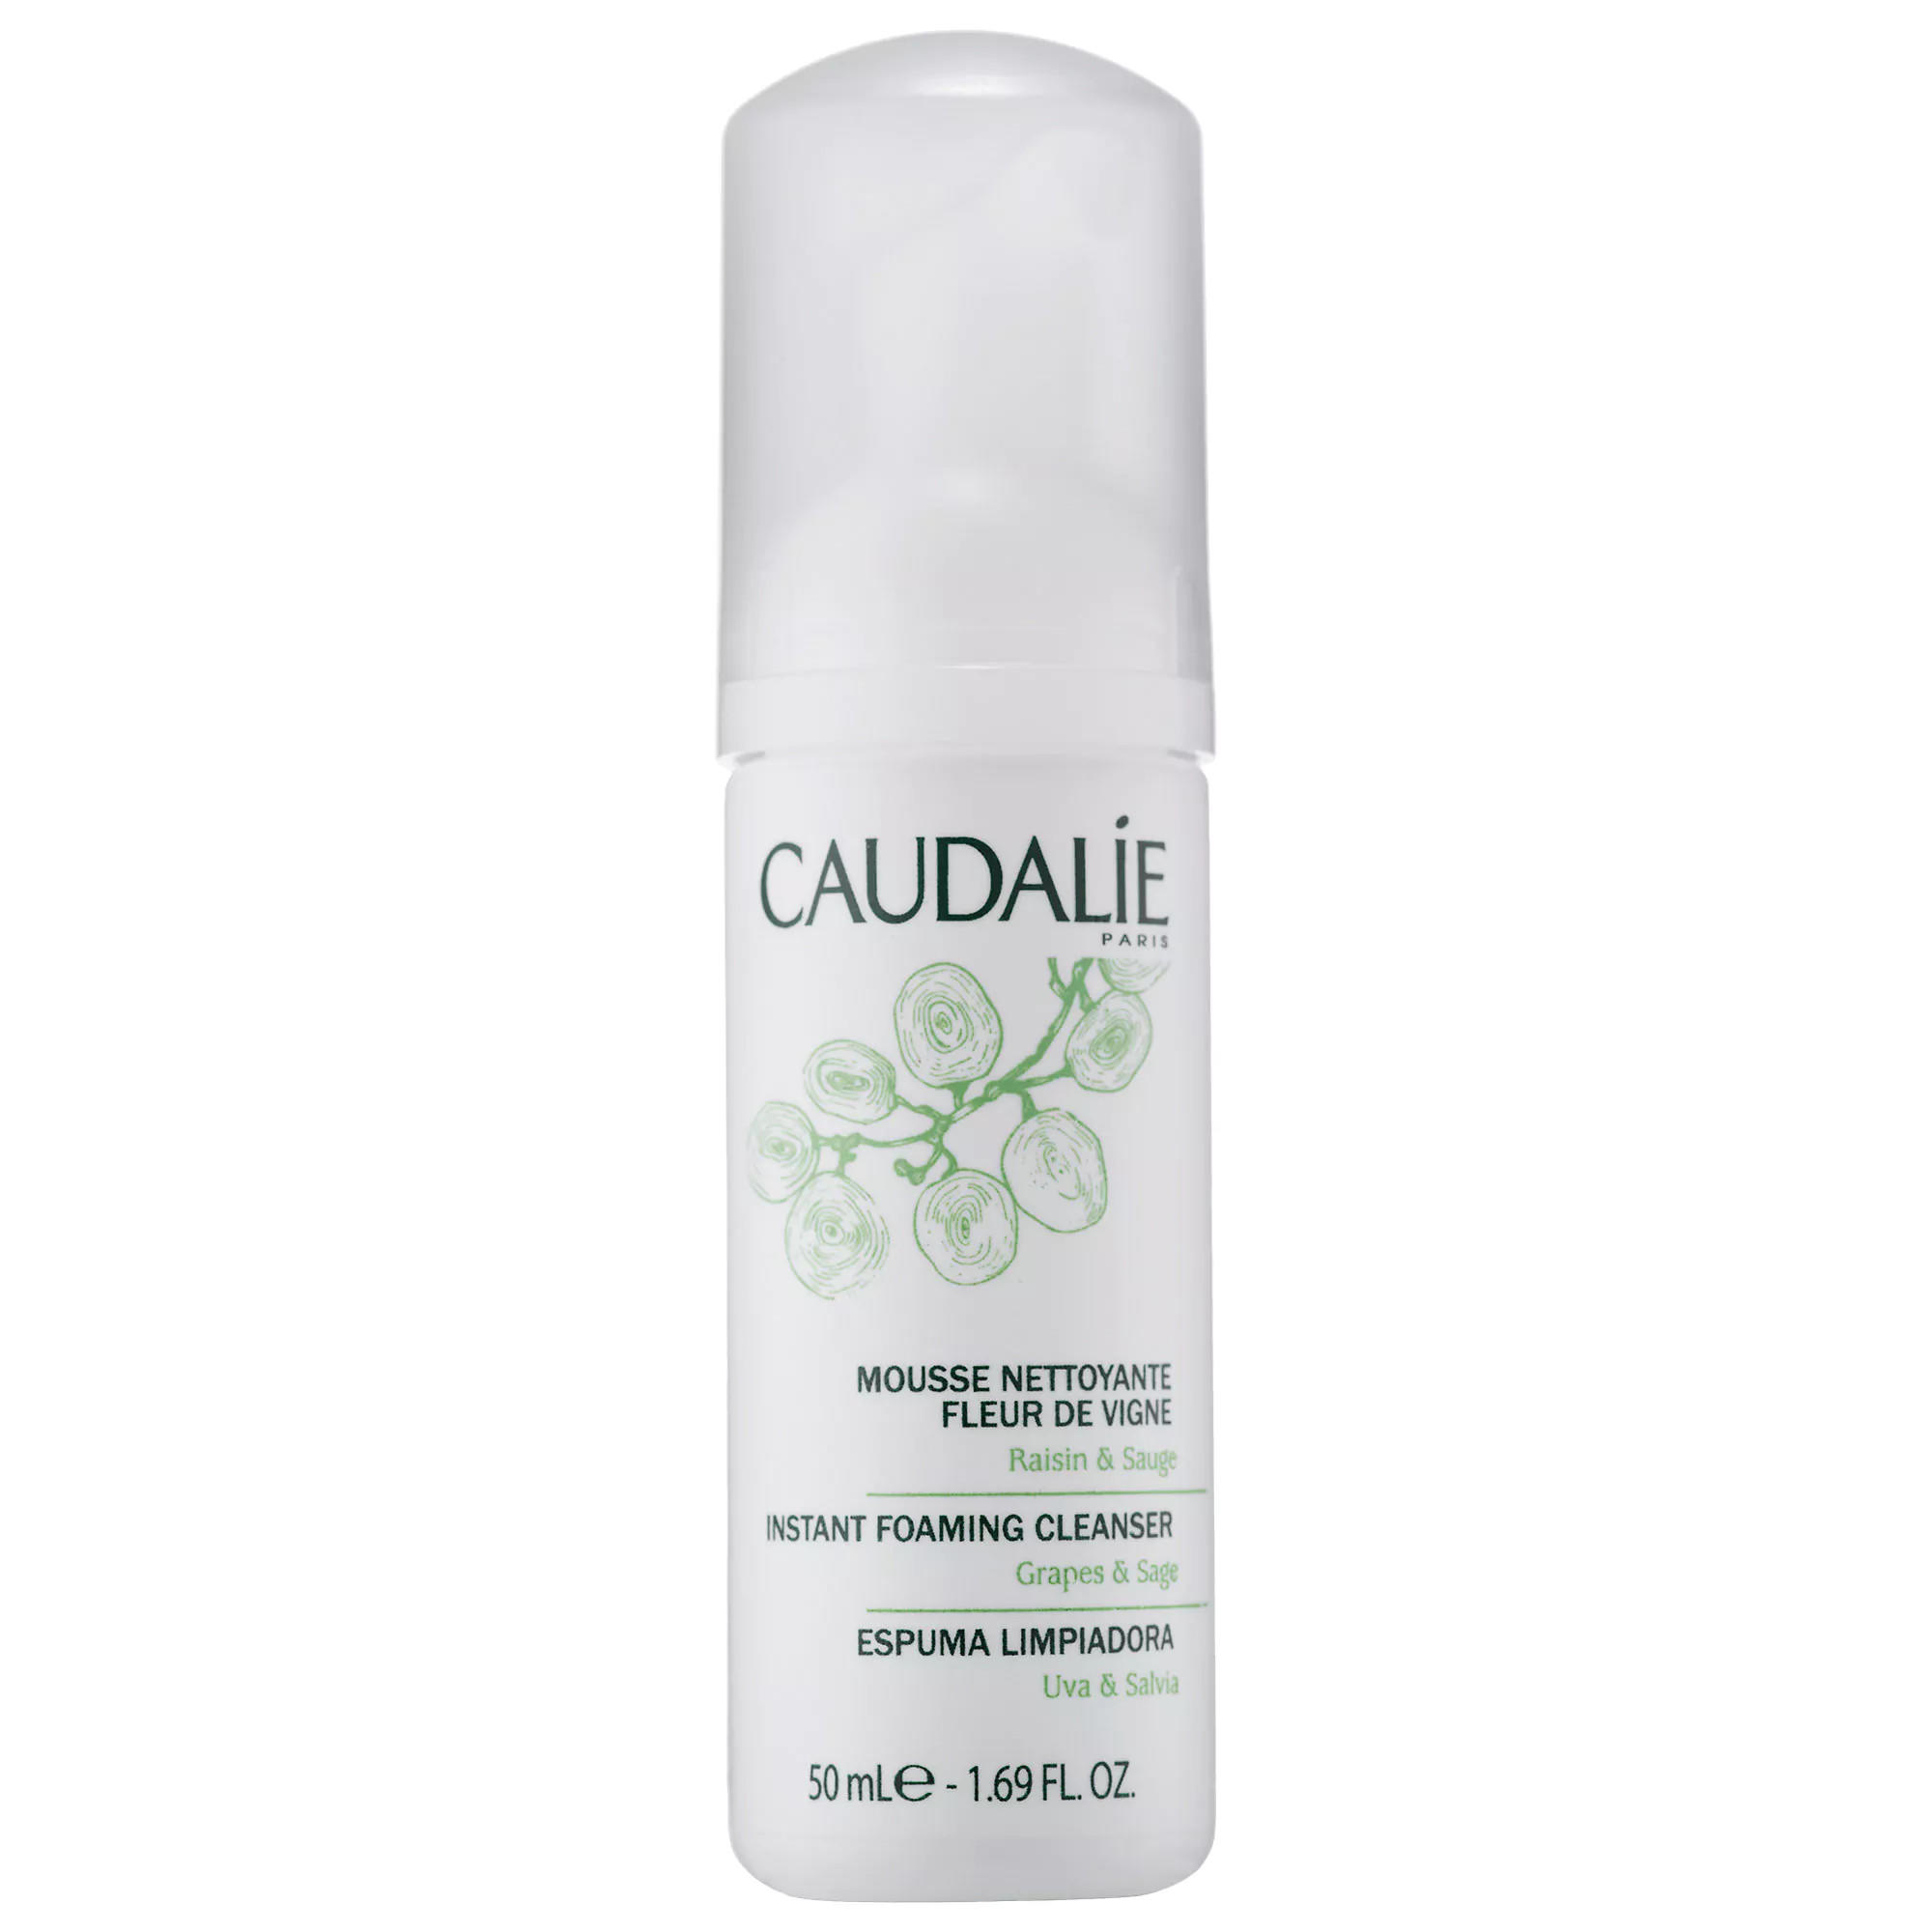 Caudalie Instant Foaming Cleanser Grapes & Sage 50ml